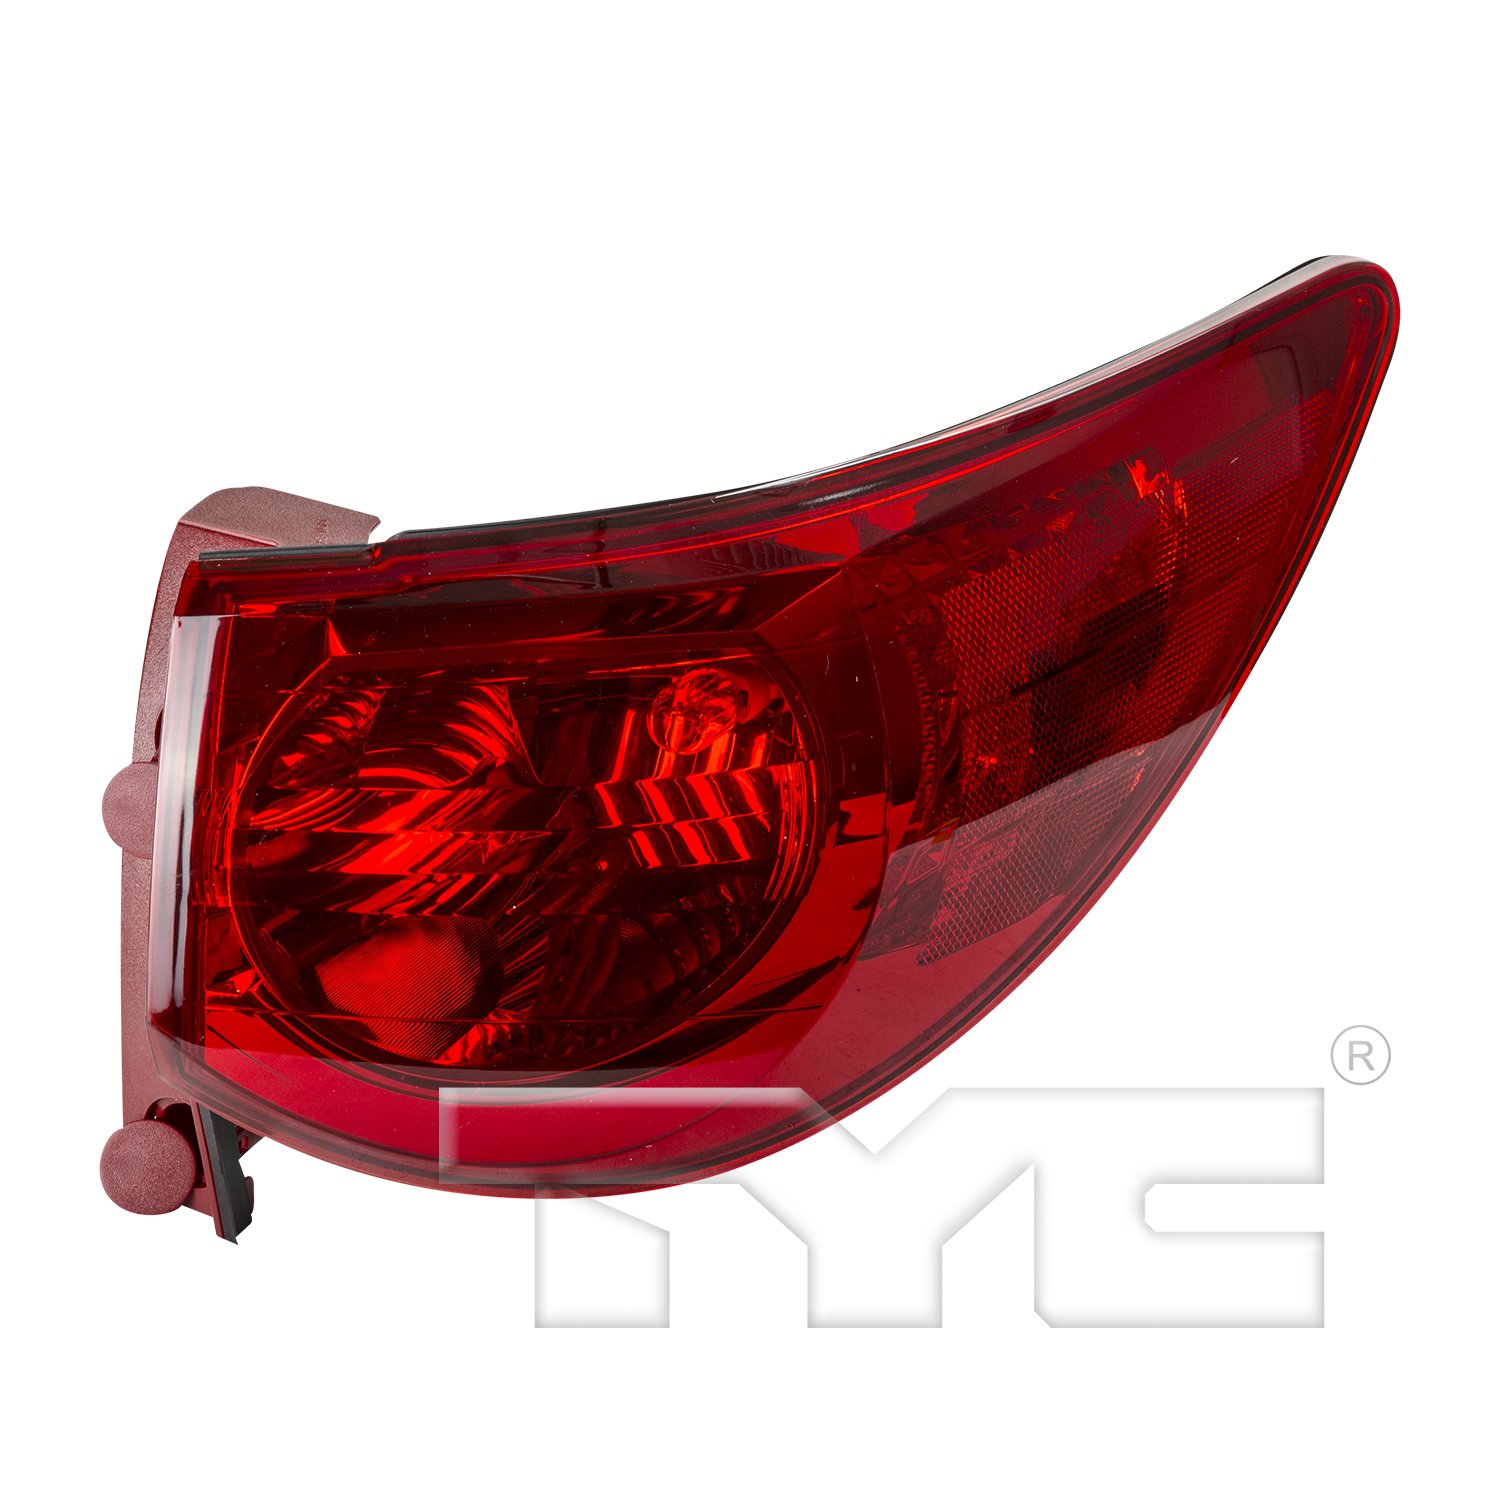 Aftermarket TAILLIGHTS for CHEVROLET - TRAVERSE, TRAVERSE,09-12,RT Taillamp assy